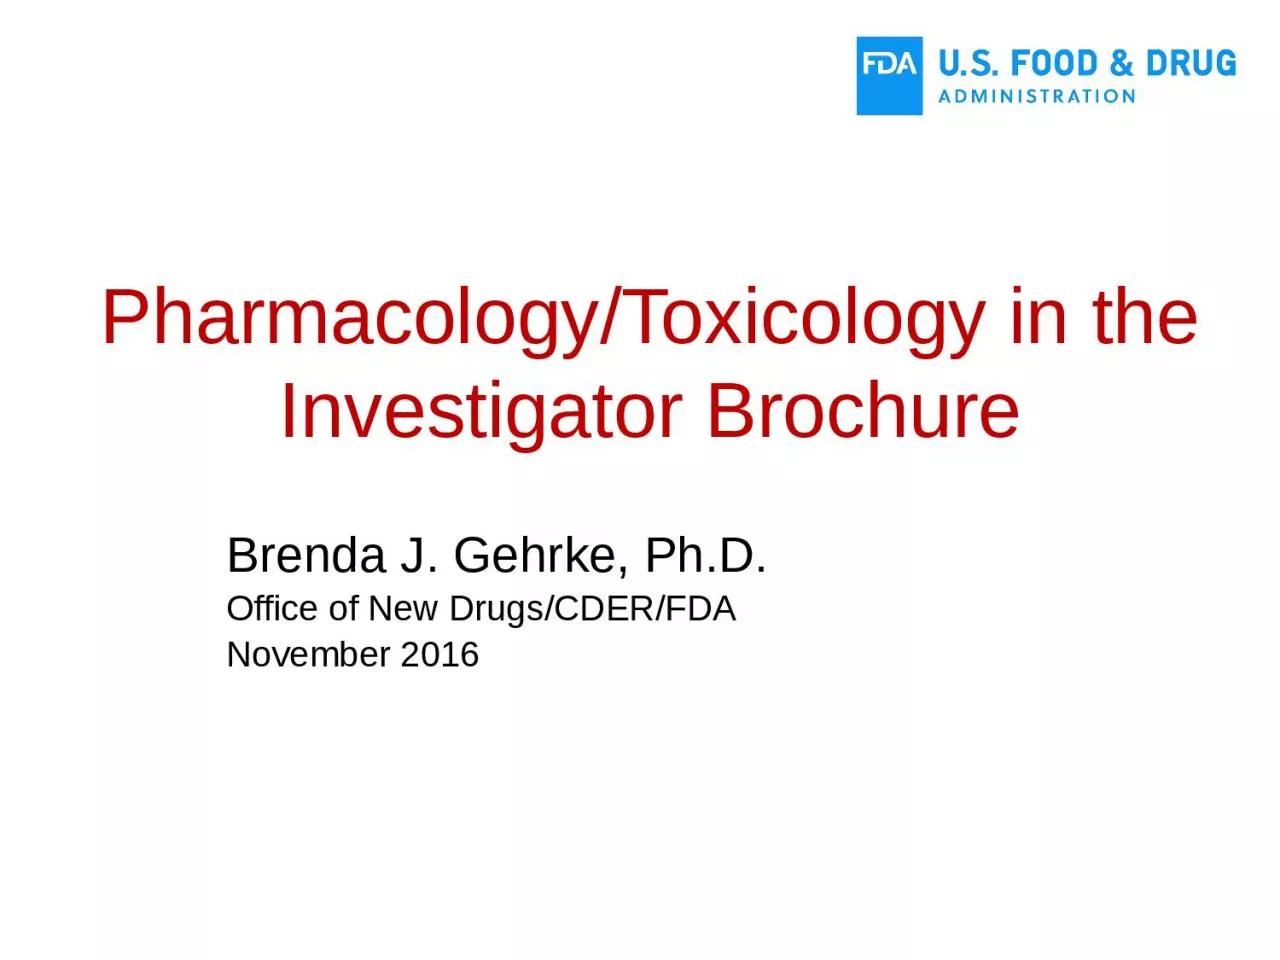 Pharmacology/Toxicology in the Investigator Brochure